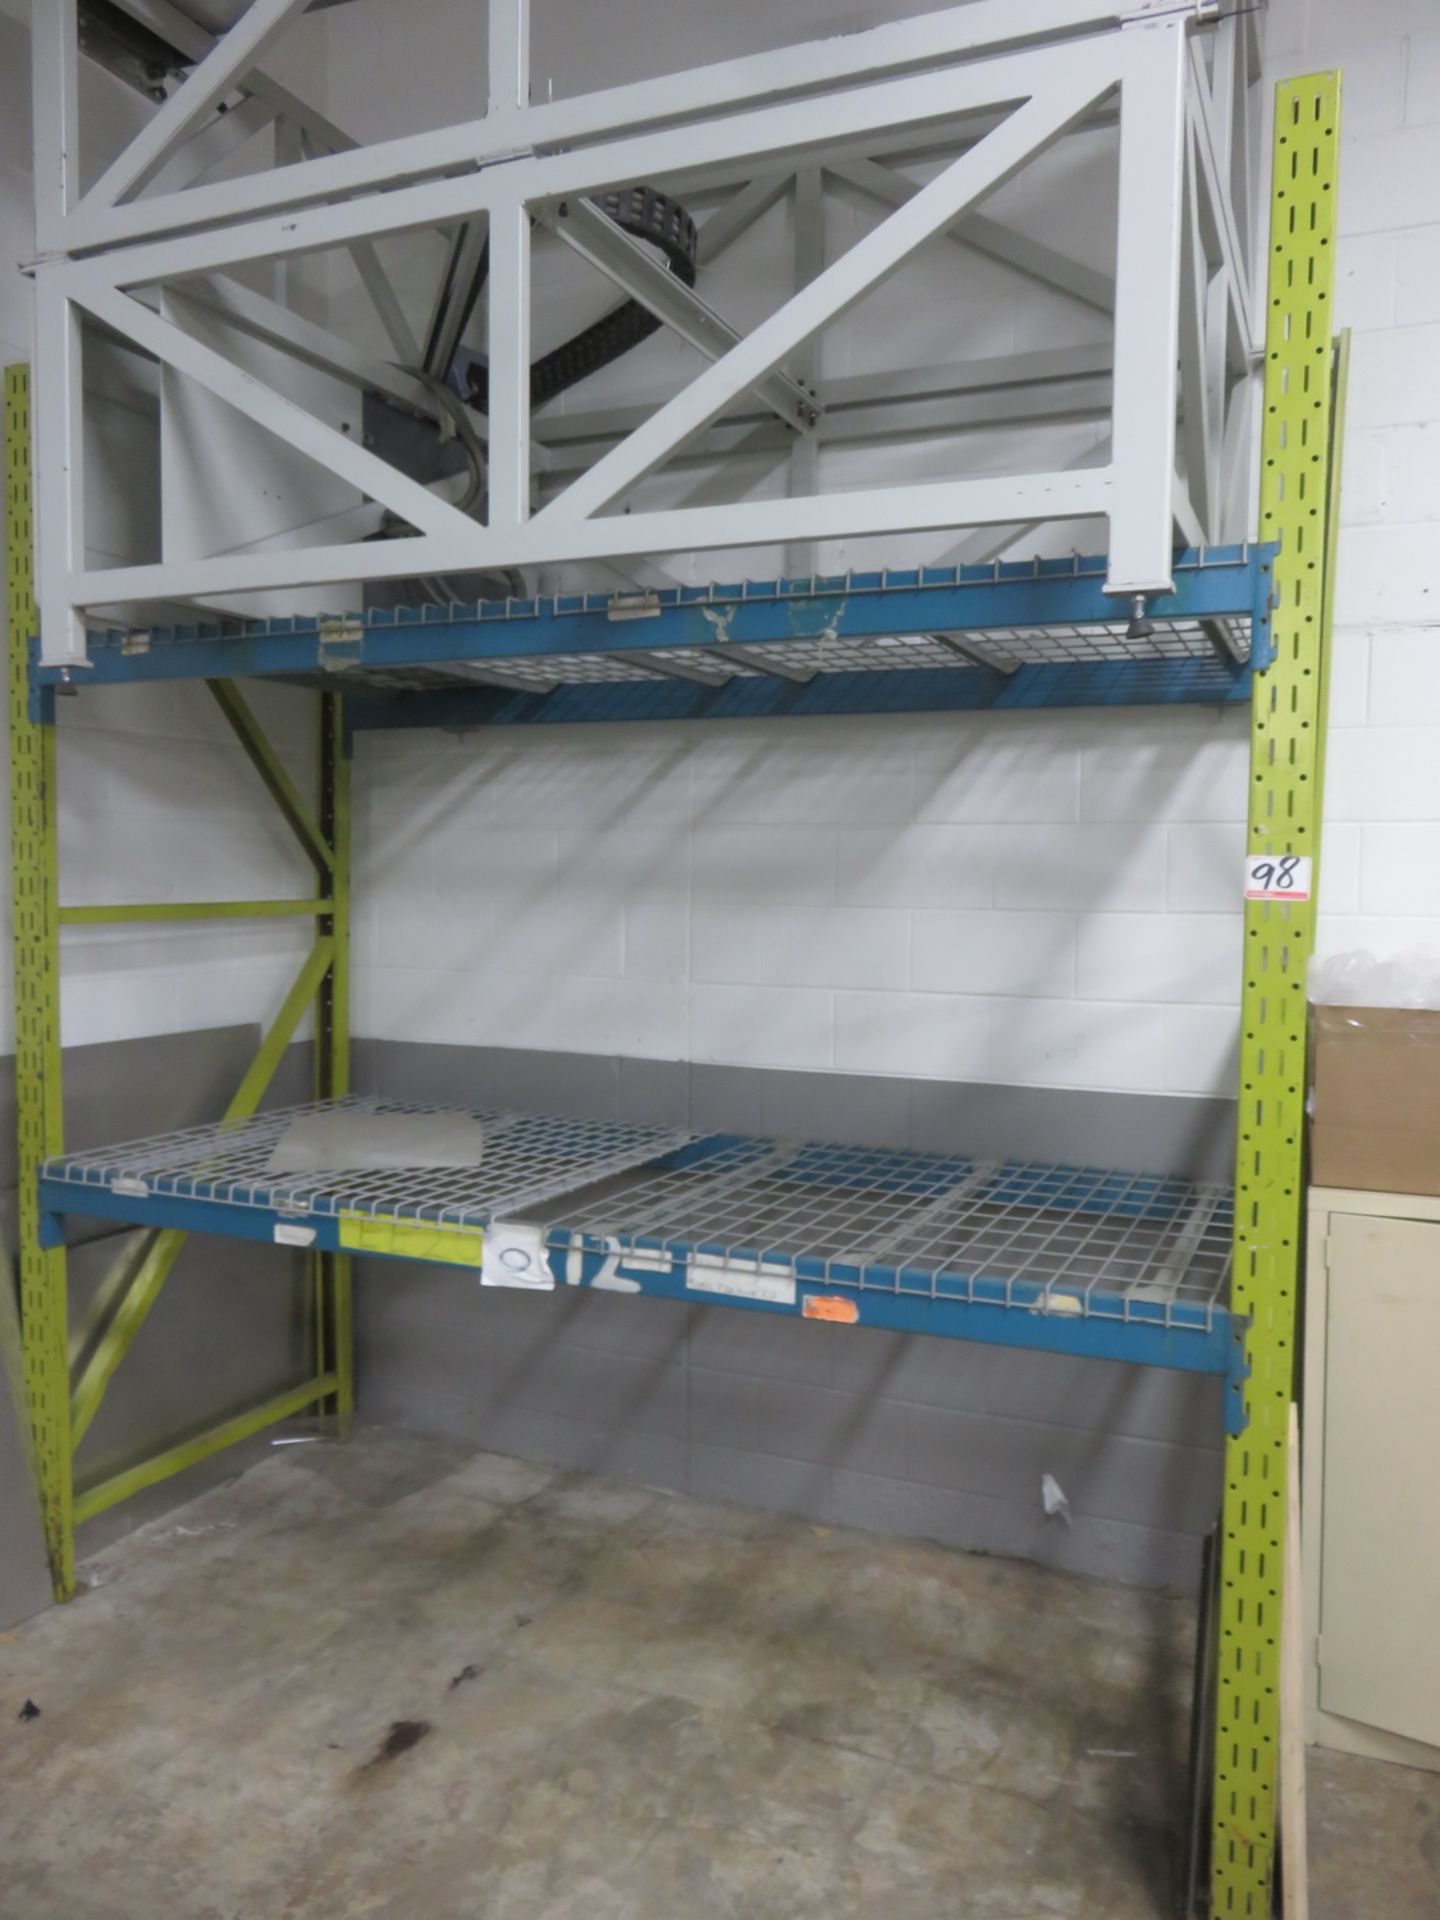 SECTIONS - TRIPLE A 42" X 8' X 10'H PALLET RACKING YELLOW/ BLUE 4 STRINGERS/ SECTION - Image 2 of 2